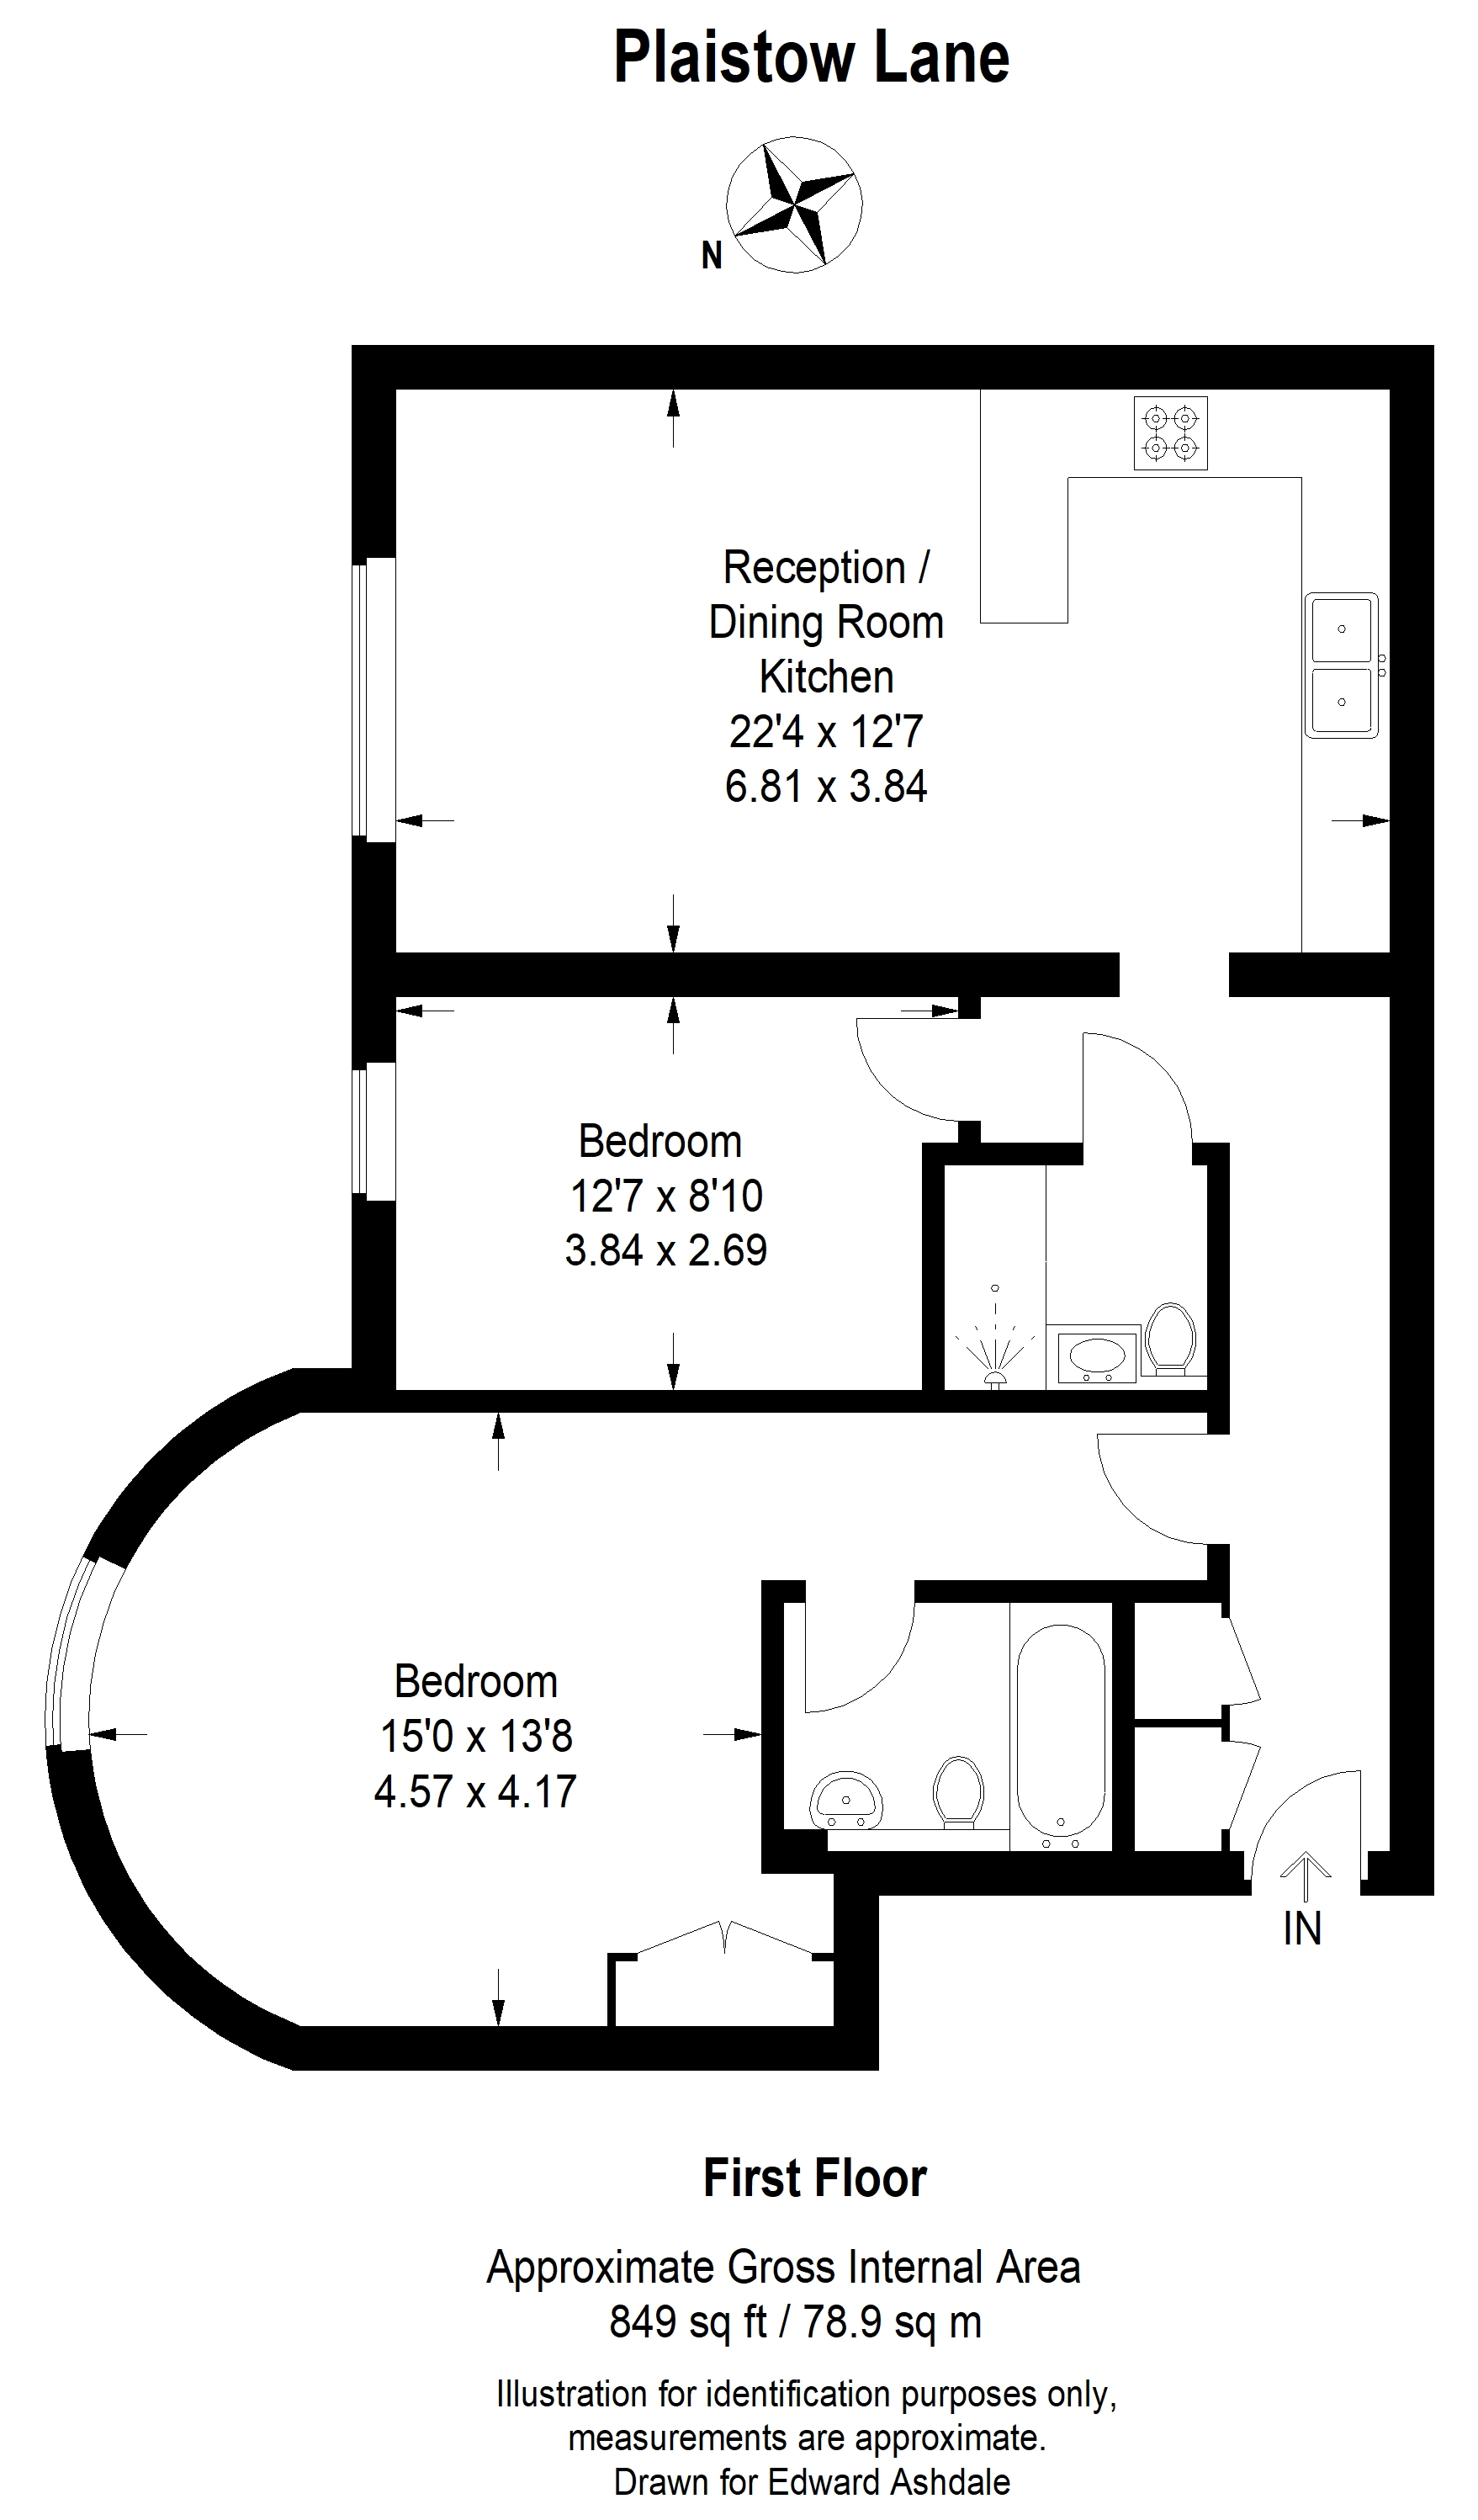 2 bed apartment to rent in Plaistow Lane, Bromley - Property floorplan